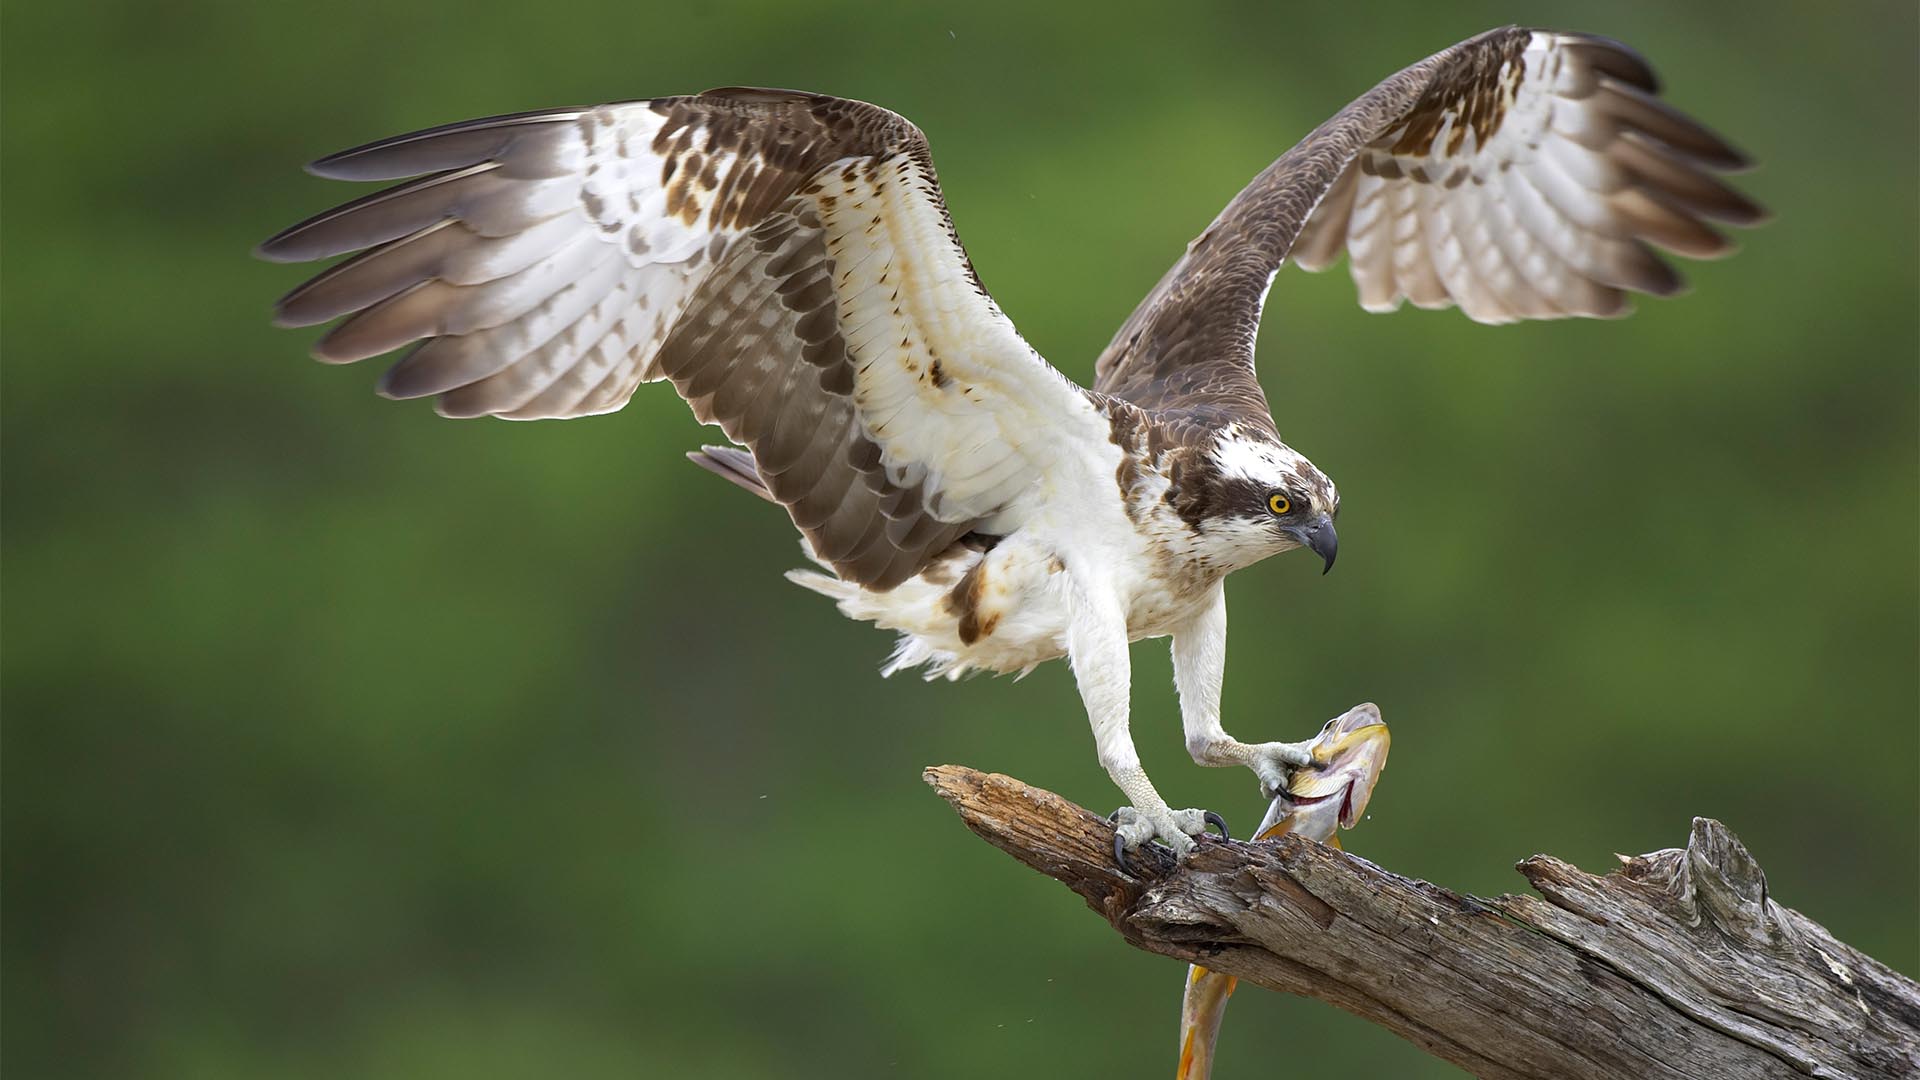 10 Fascinating Facts About the Amazing Osprey